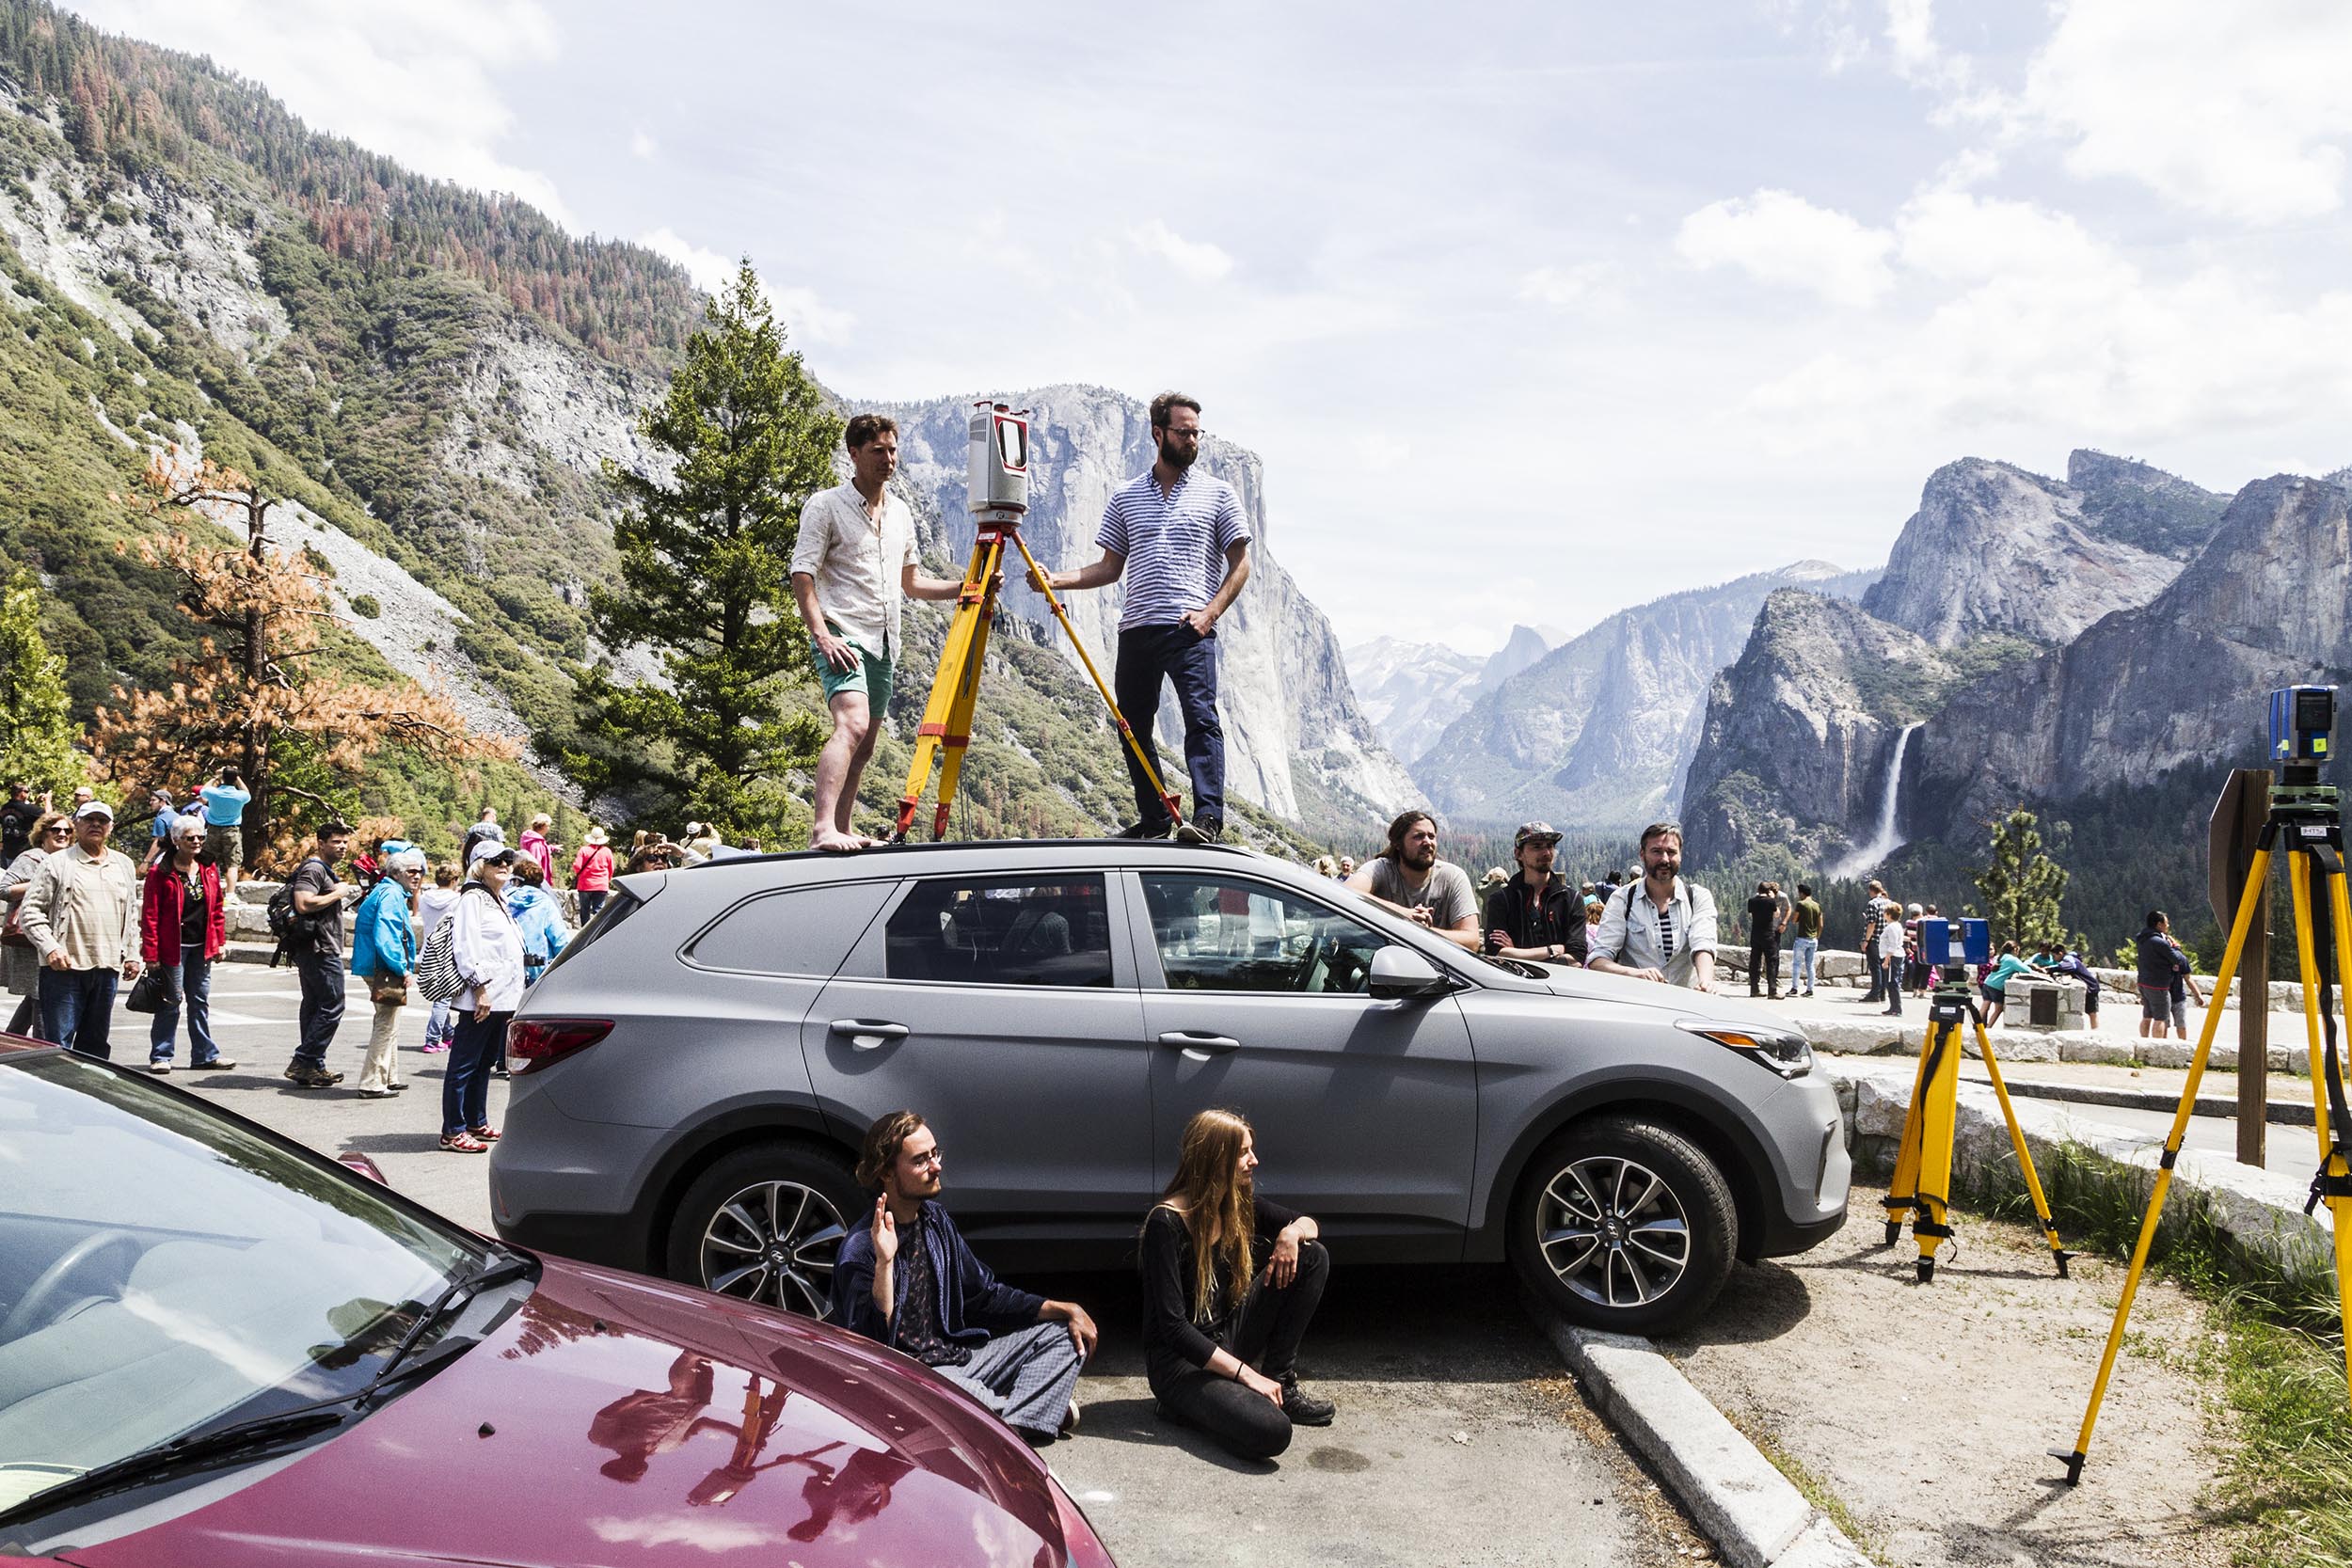 The ScanLAB team and their expedition vehicle at Tunnel View, Yosemite, © ScanLAB Projects